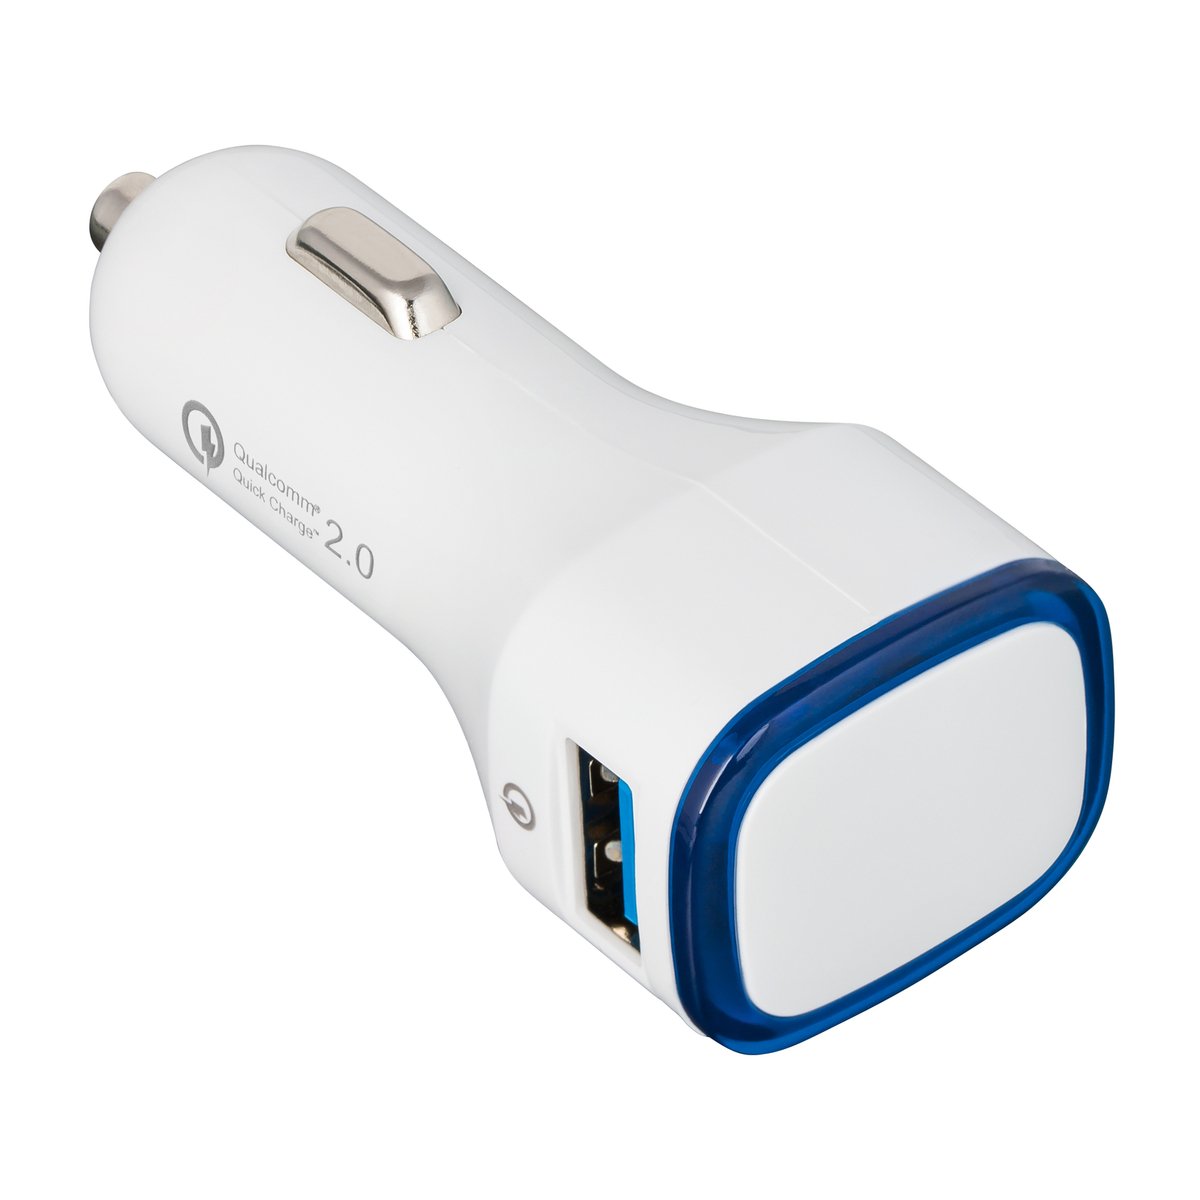 USB-Autoladeadapter Quick Charge 2.0® COLLECTION 500 blau